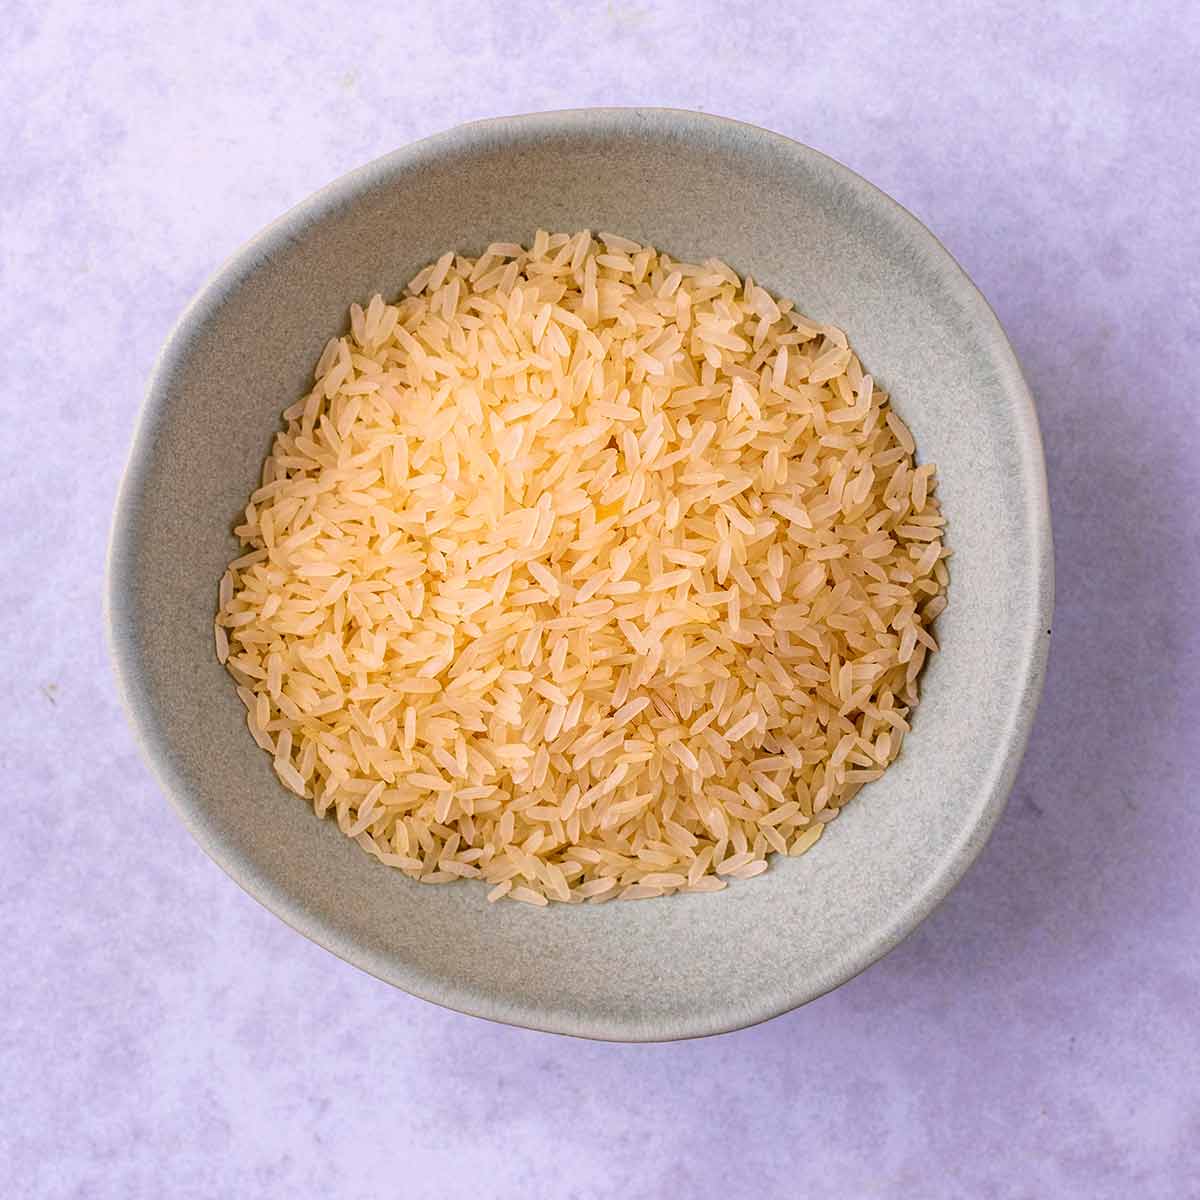 A bowl of uncooked rice.